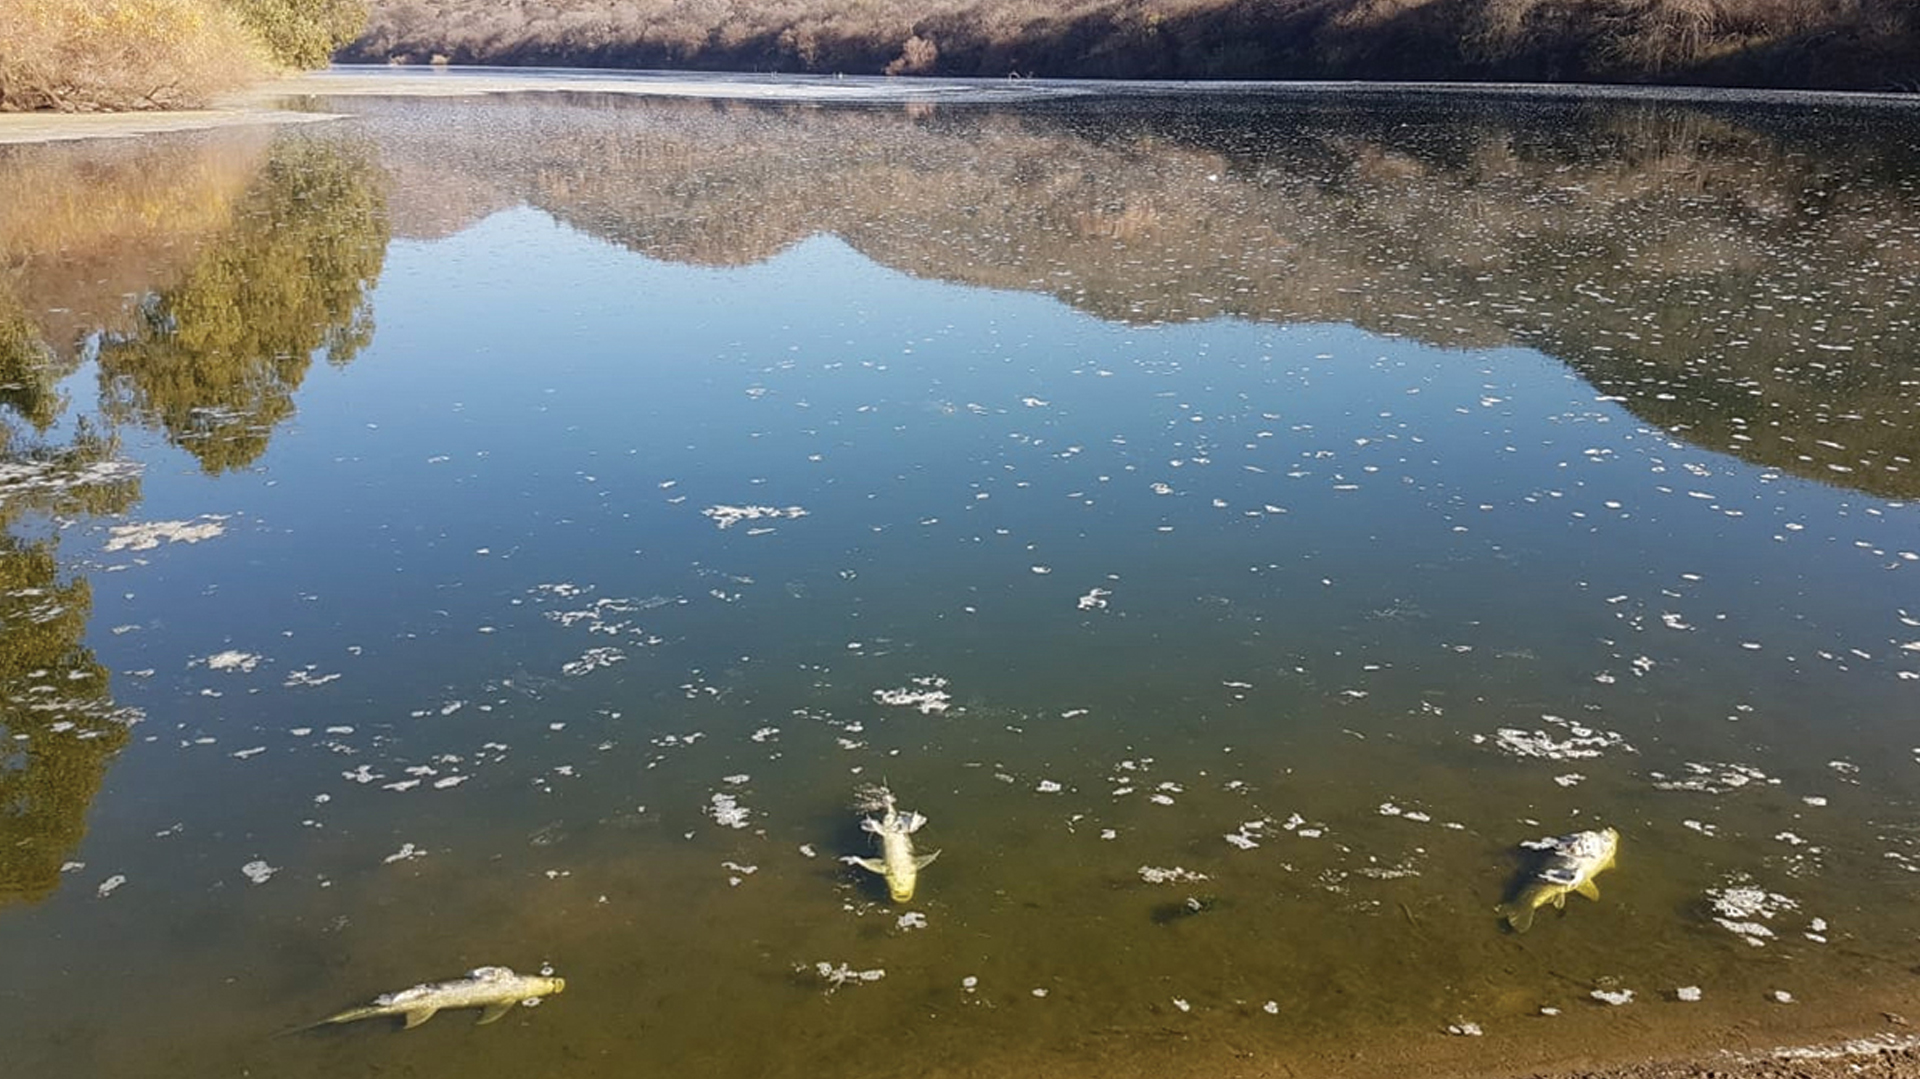 MISLEADING MEDIA REPORTS ON VAAL RIVER POLLUTION